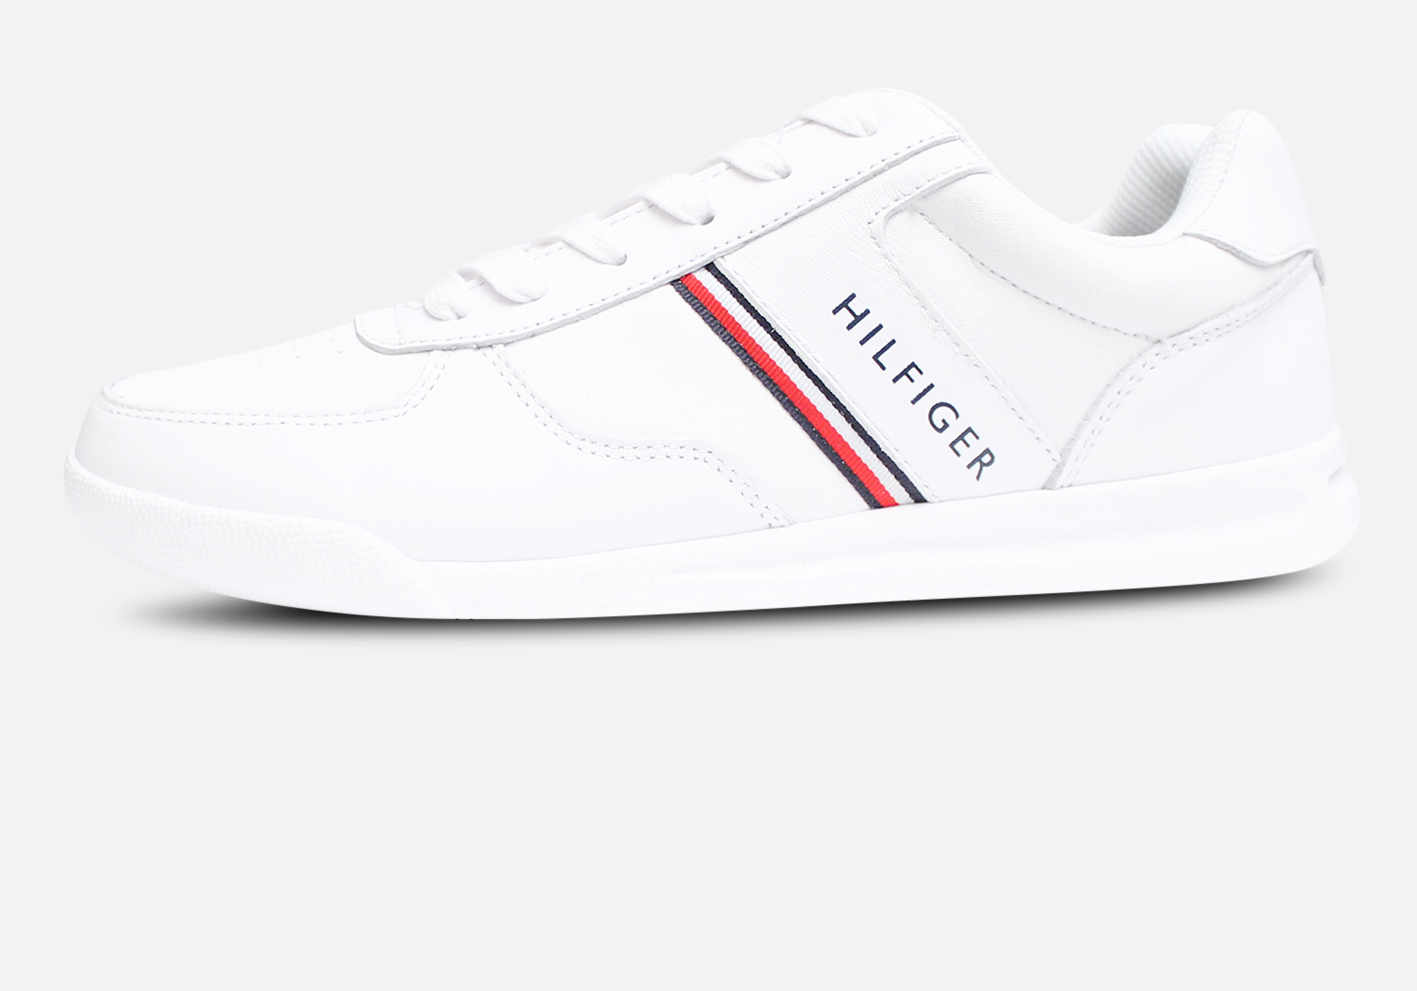 Tommy Hilfiger Retro All White Leather 